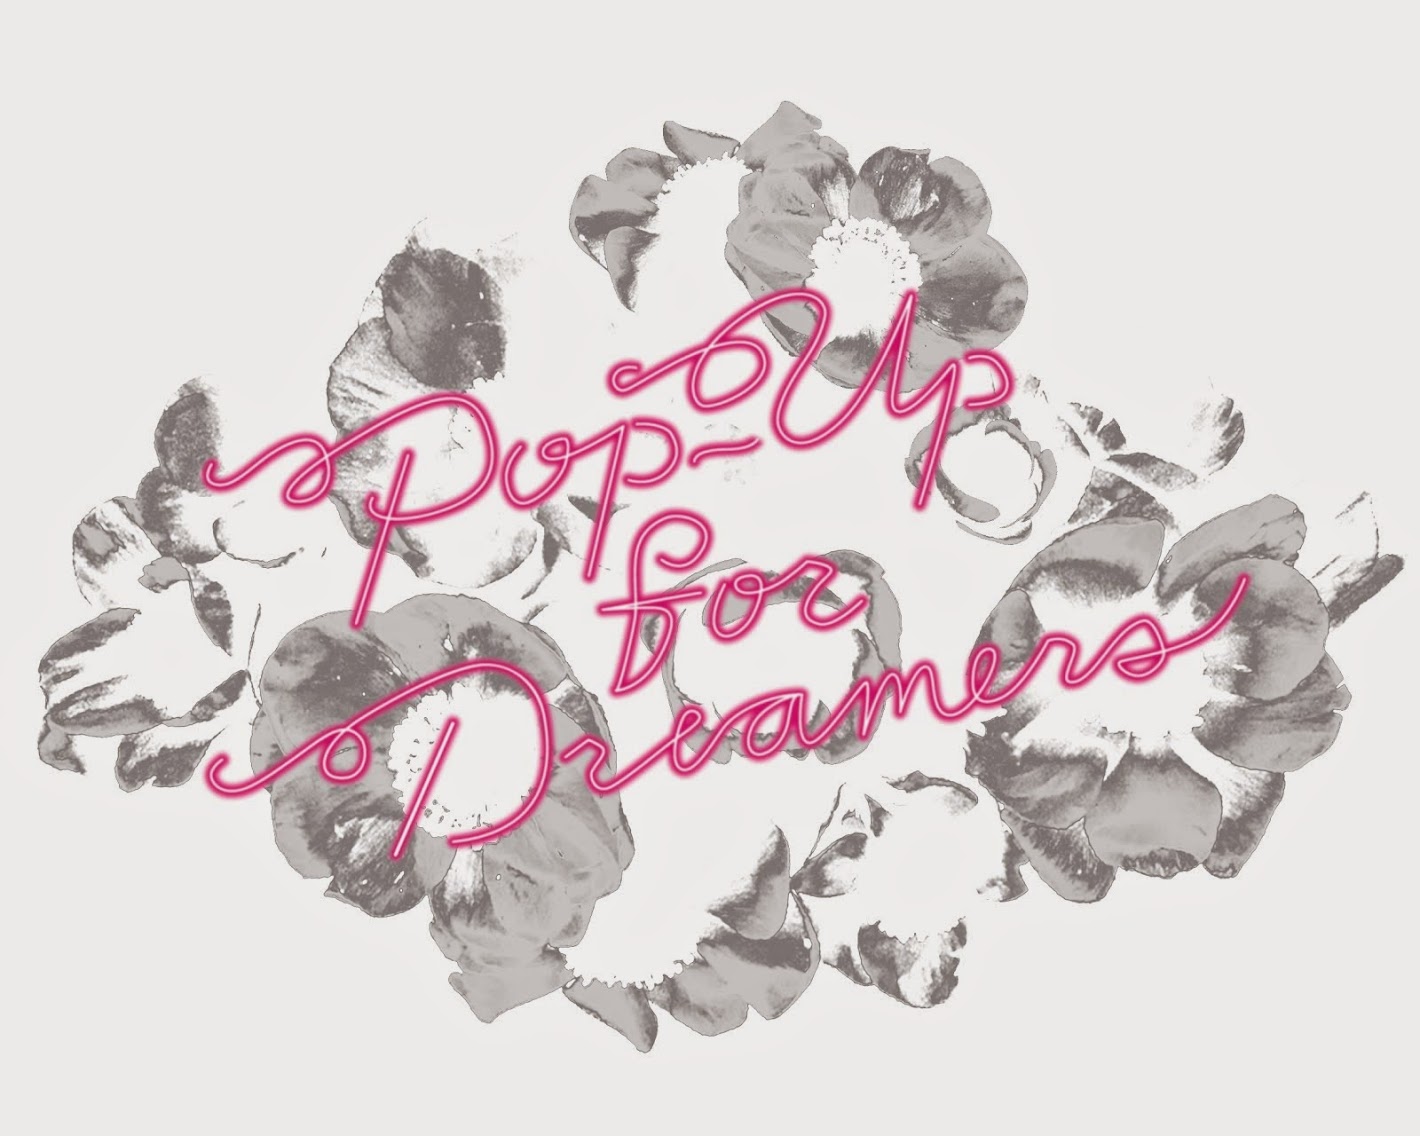 Pop-Up for Dreamers